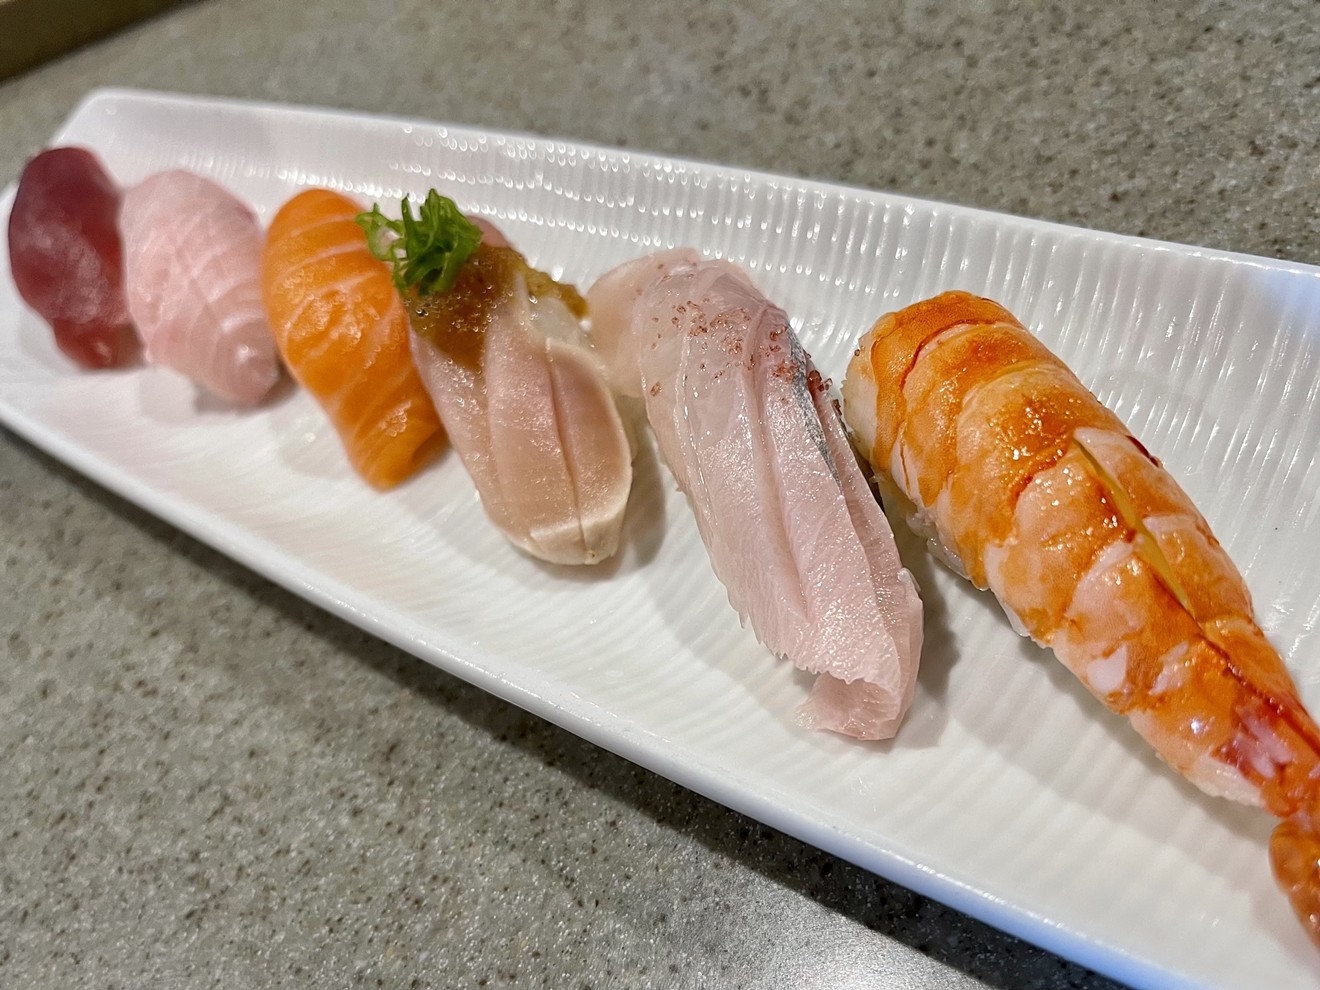 Shimogamo's menu rotates with the seasons, and the Chandler restaurant serves cuts of fresh fish right from the sushi counter.